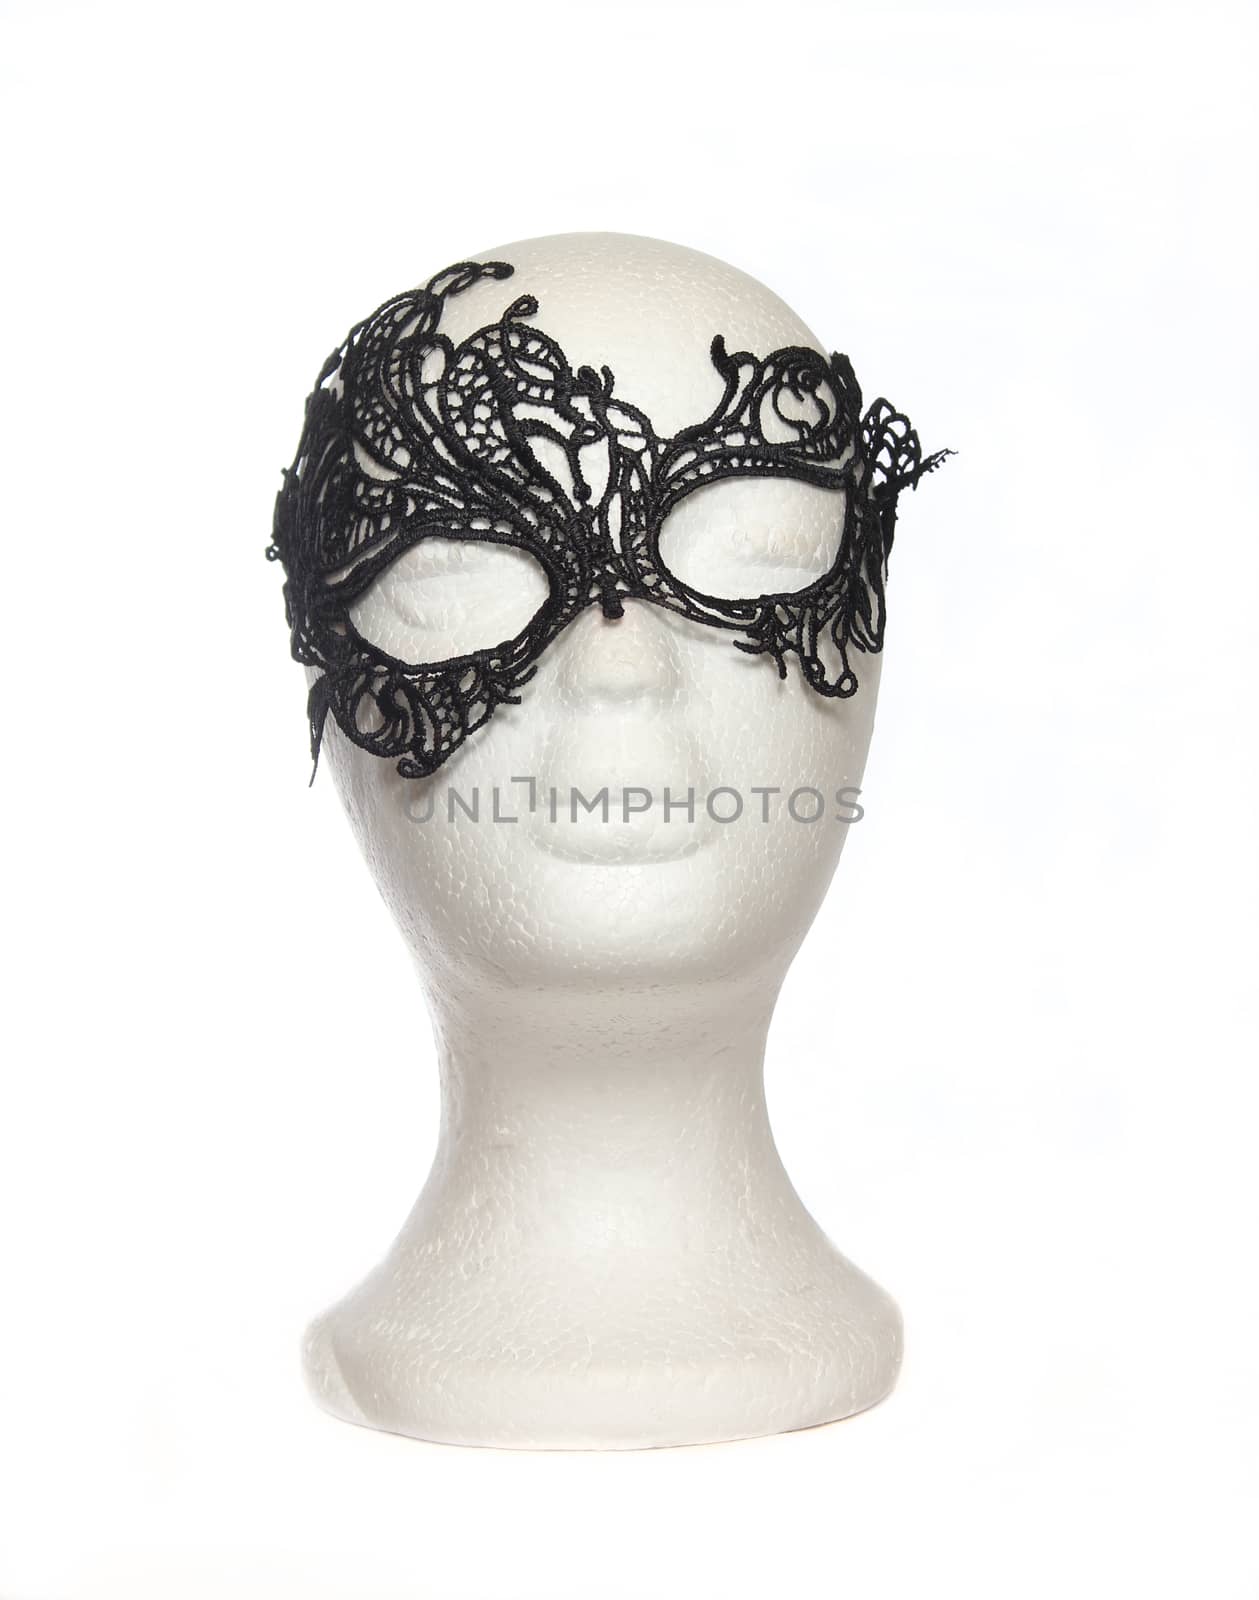 Lace Mask on Mannequin by Marti157900